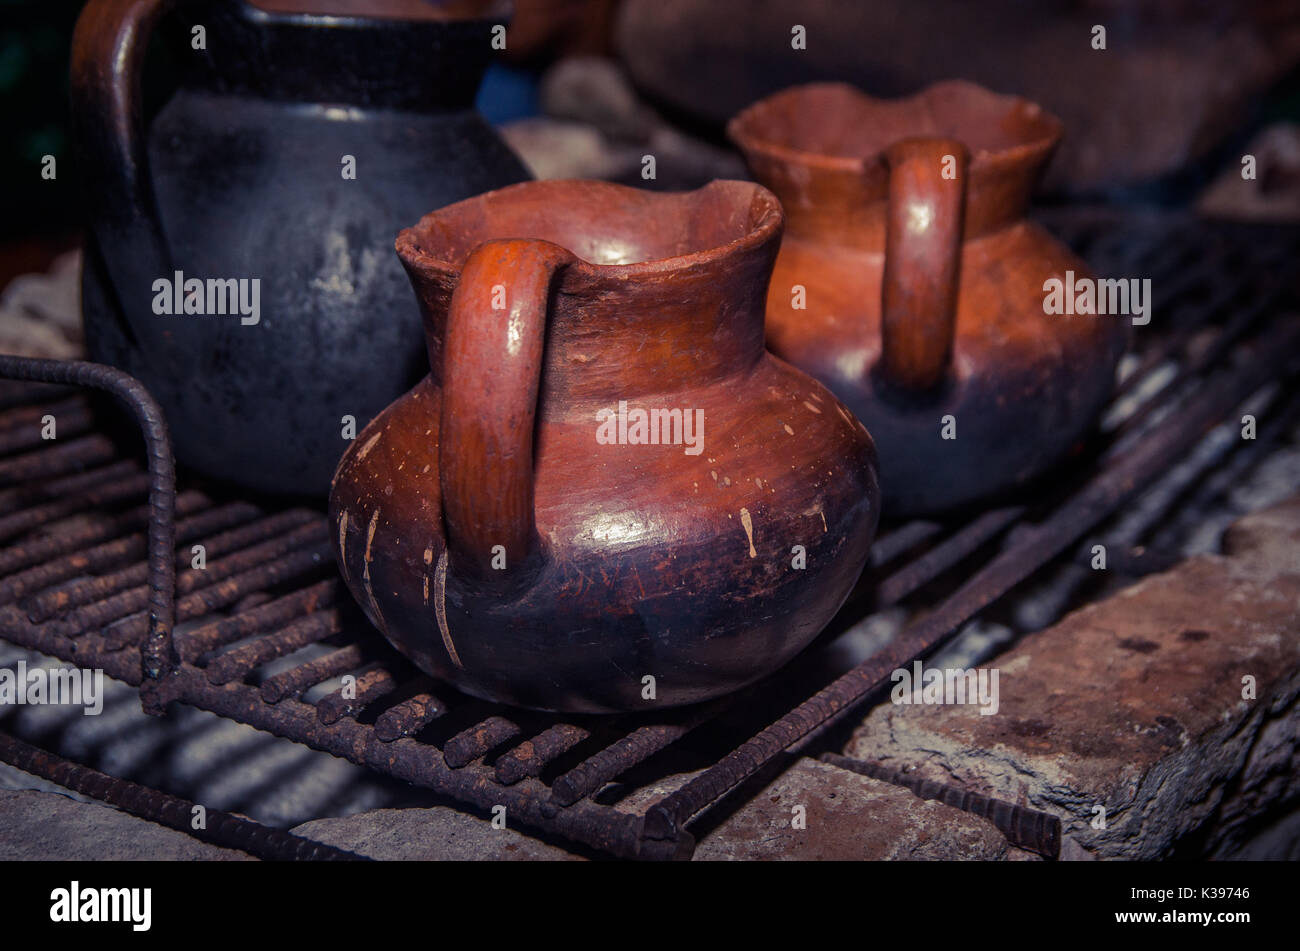 https://c8.alamy.com/comp/K39746/close-up-of-a-jar-of-clay-over-a-wood-stove-boiling-water-to-mix-with-K39746.jpg